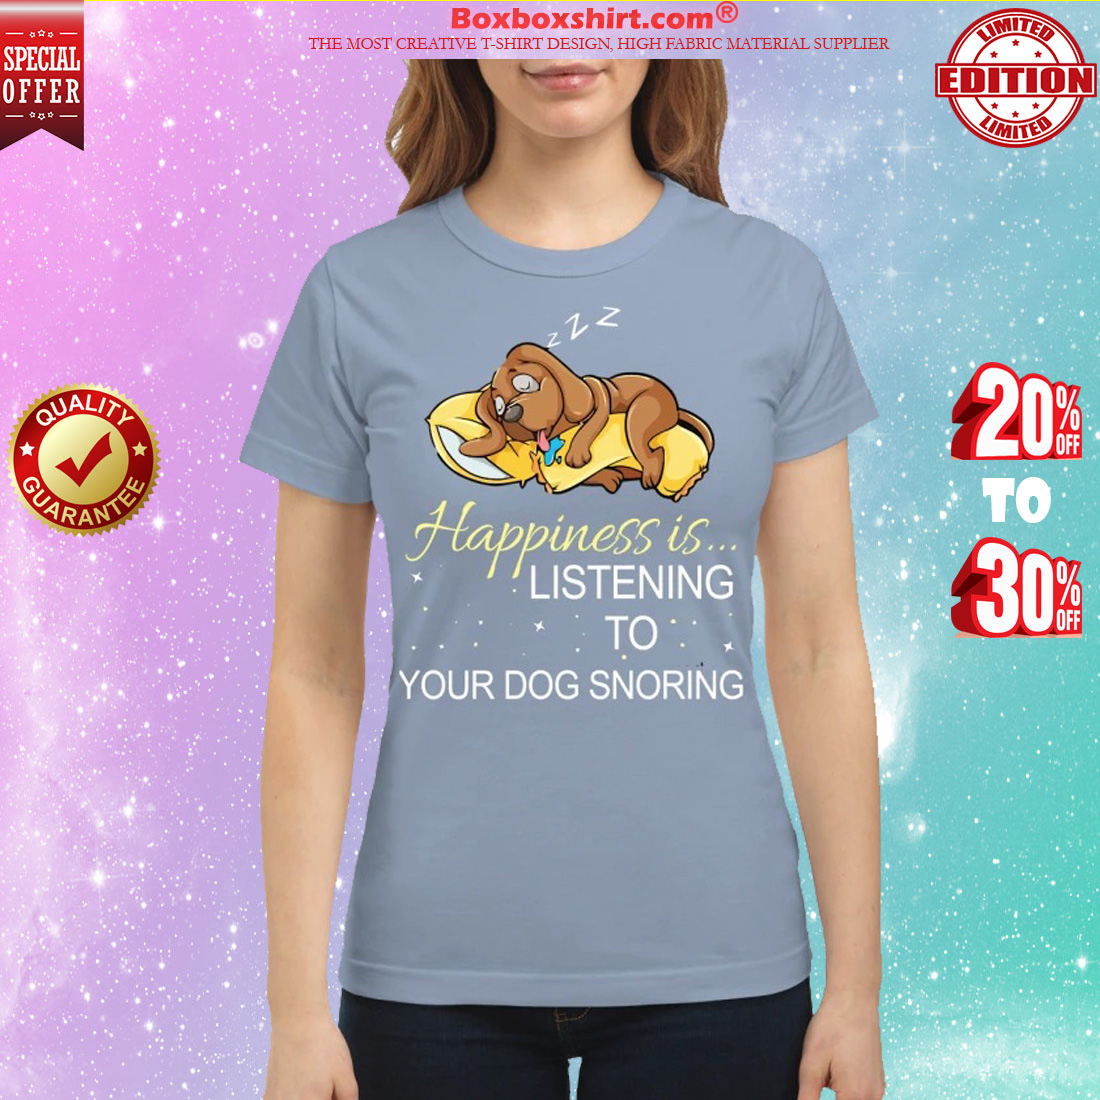 Happiness is listening to your dog snoring shirt